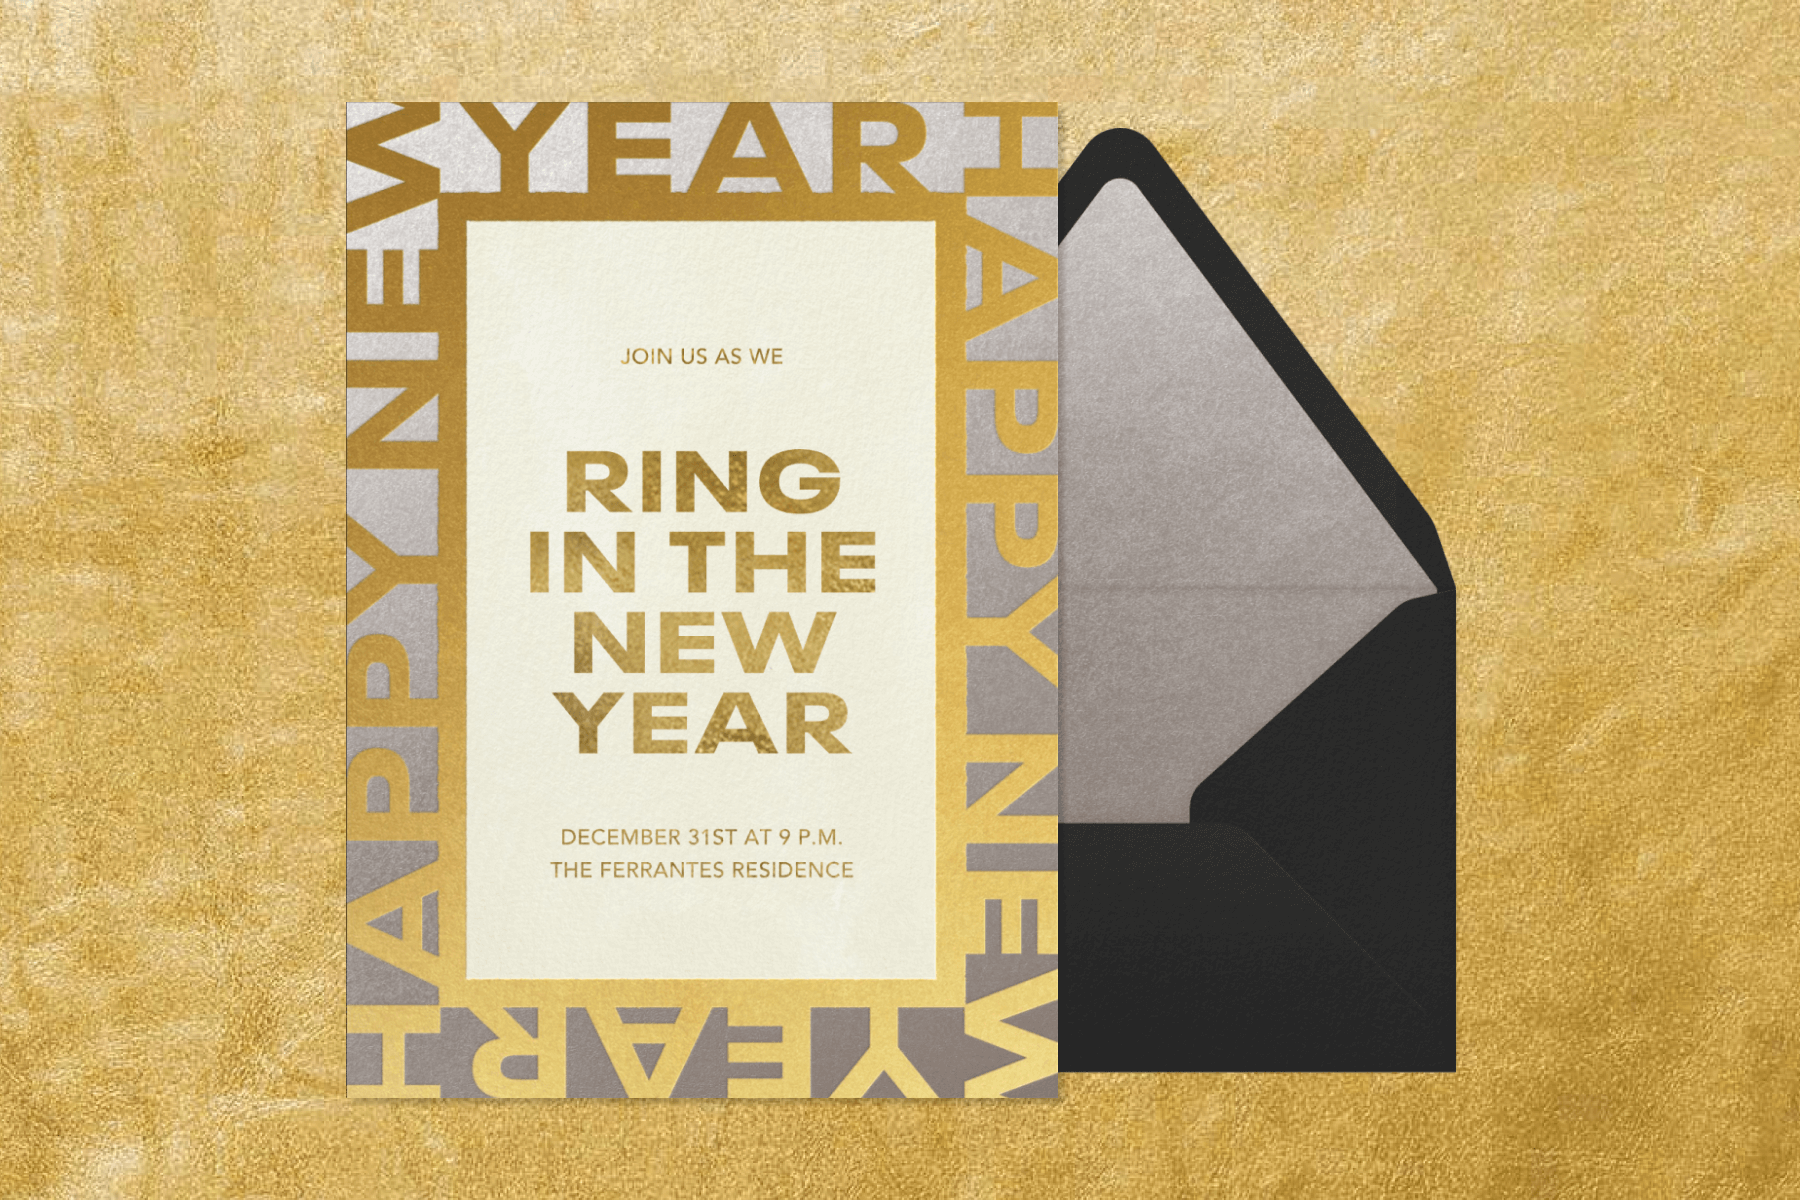 A card reads “ring in the new year” in gold block letters with the words “happy new year” forming a frame.